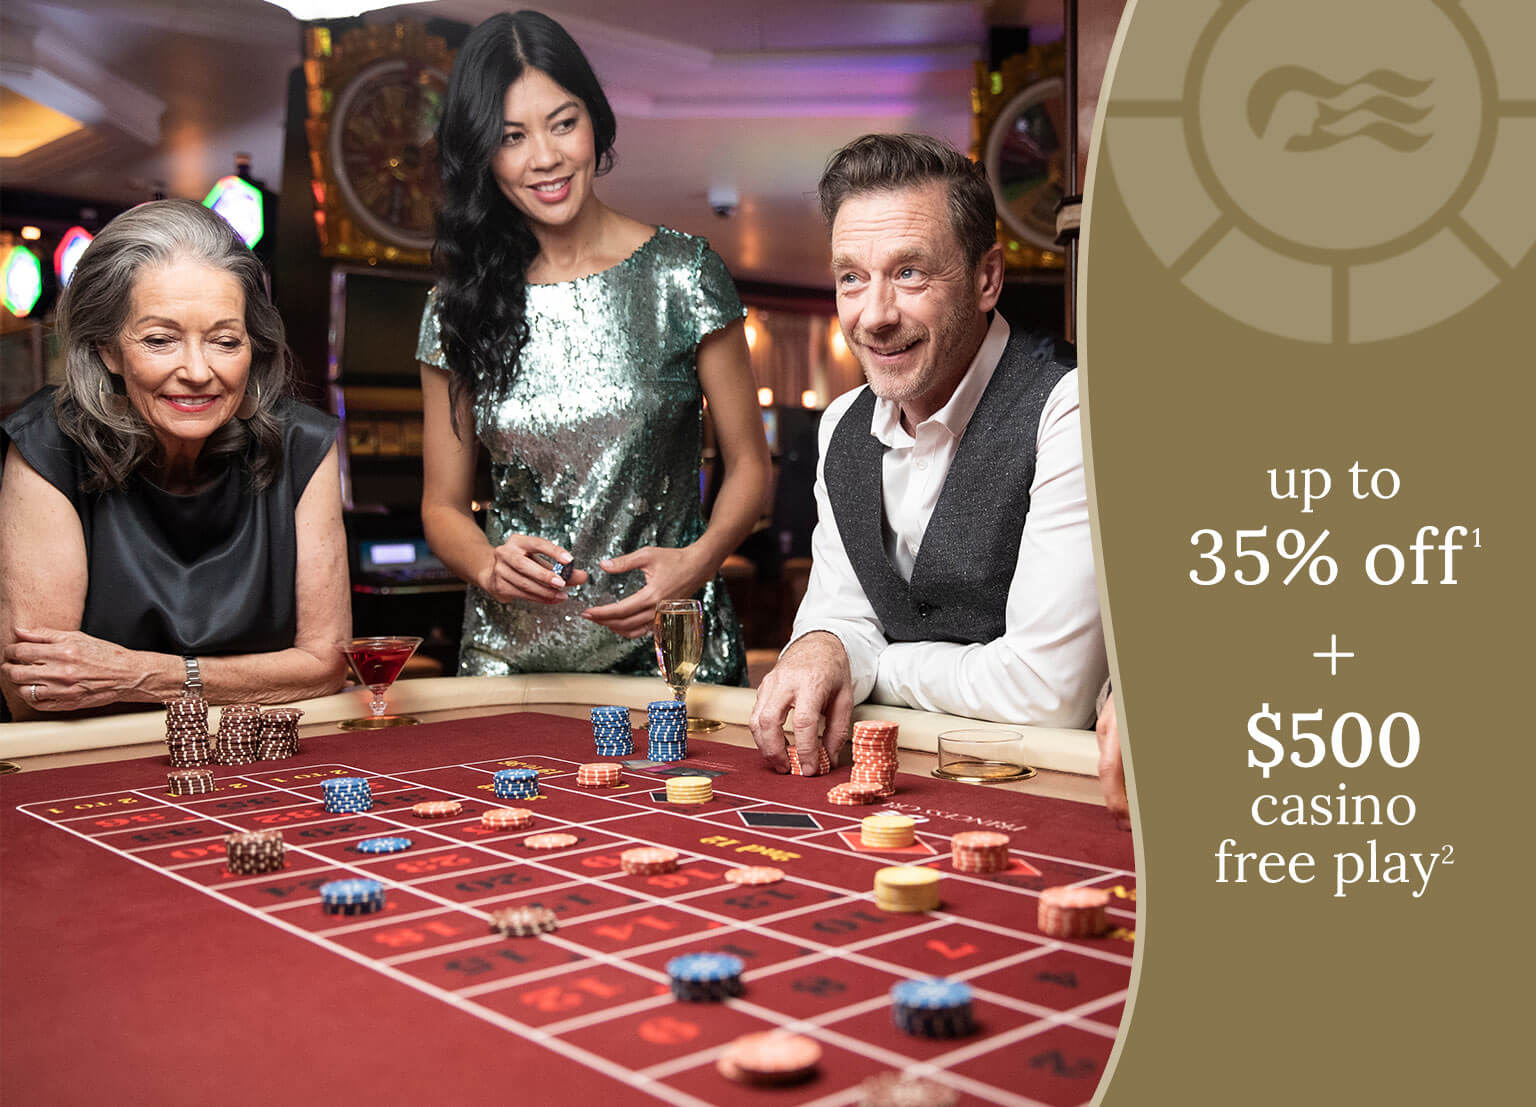 Up to 35% off(1) + $500 casino free play(2)